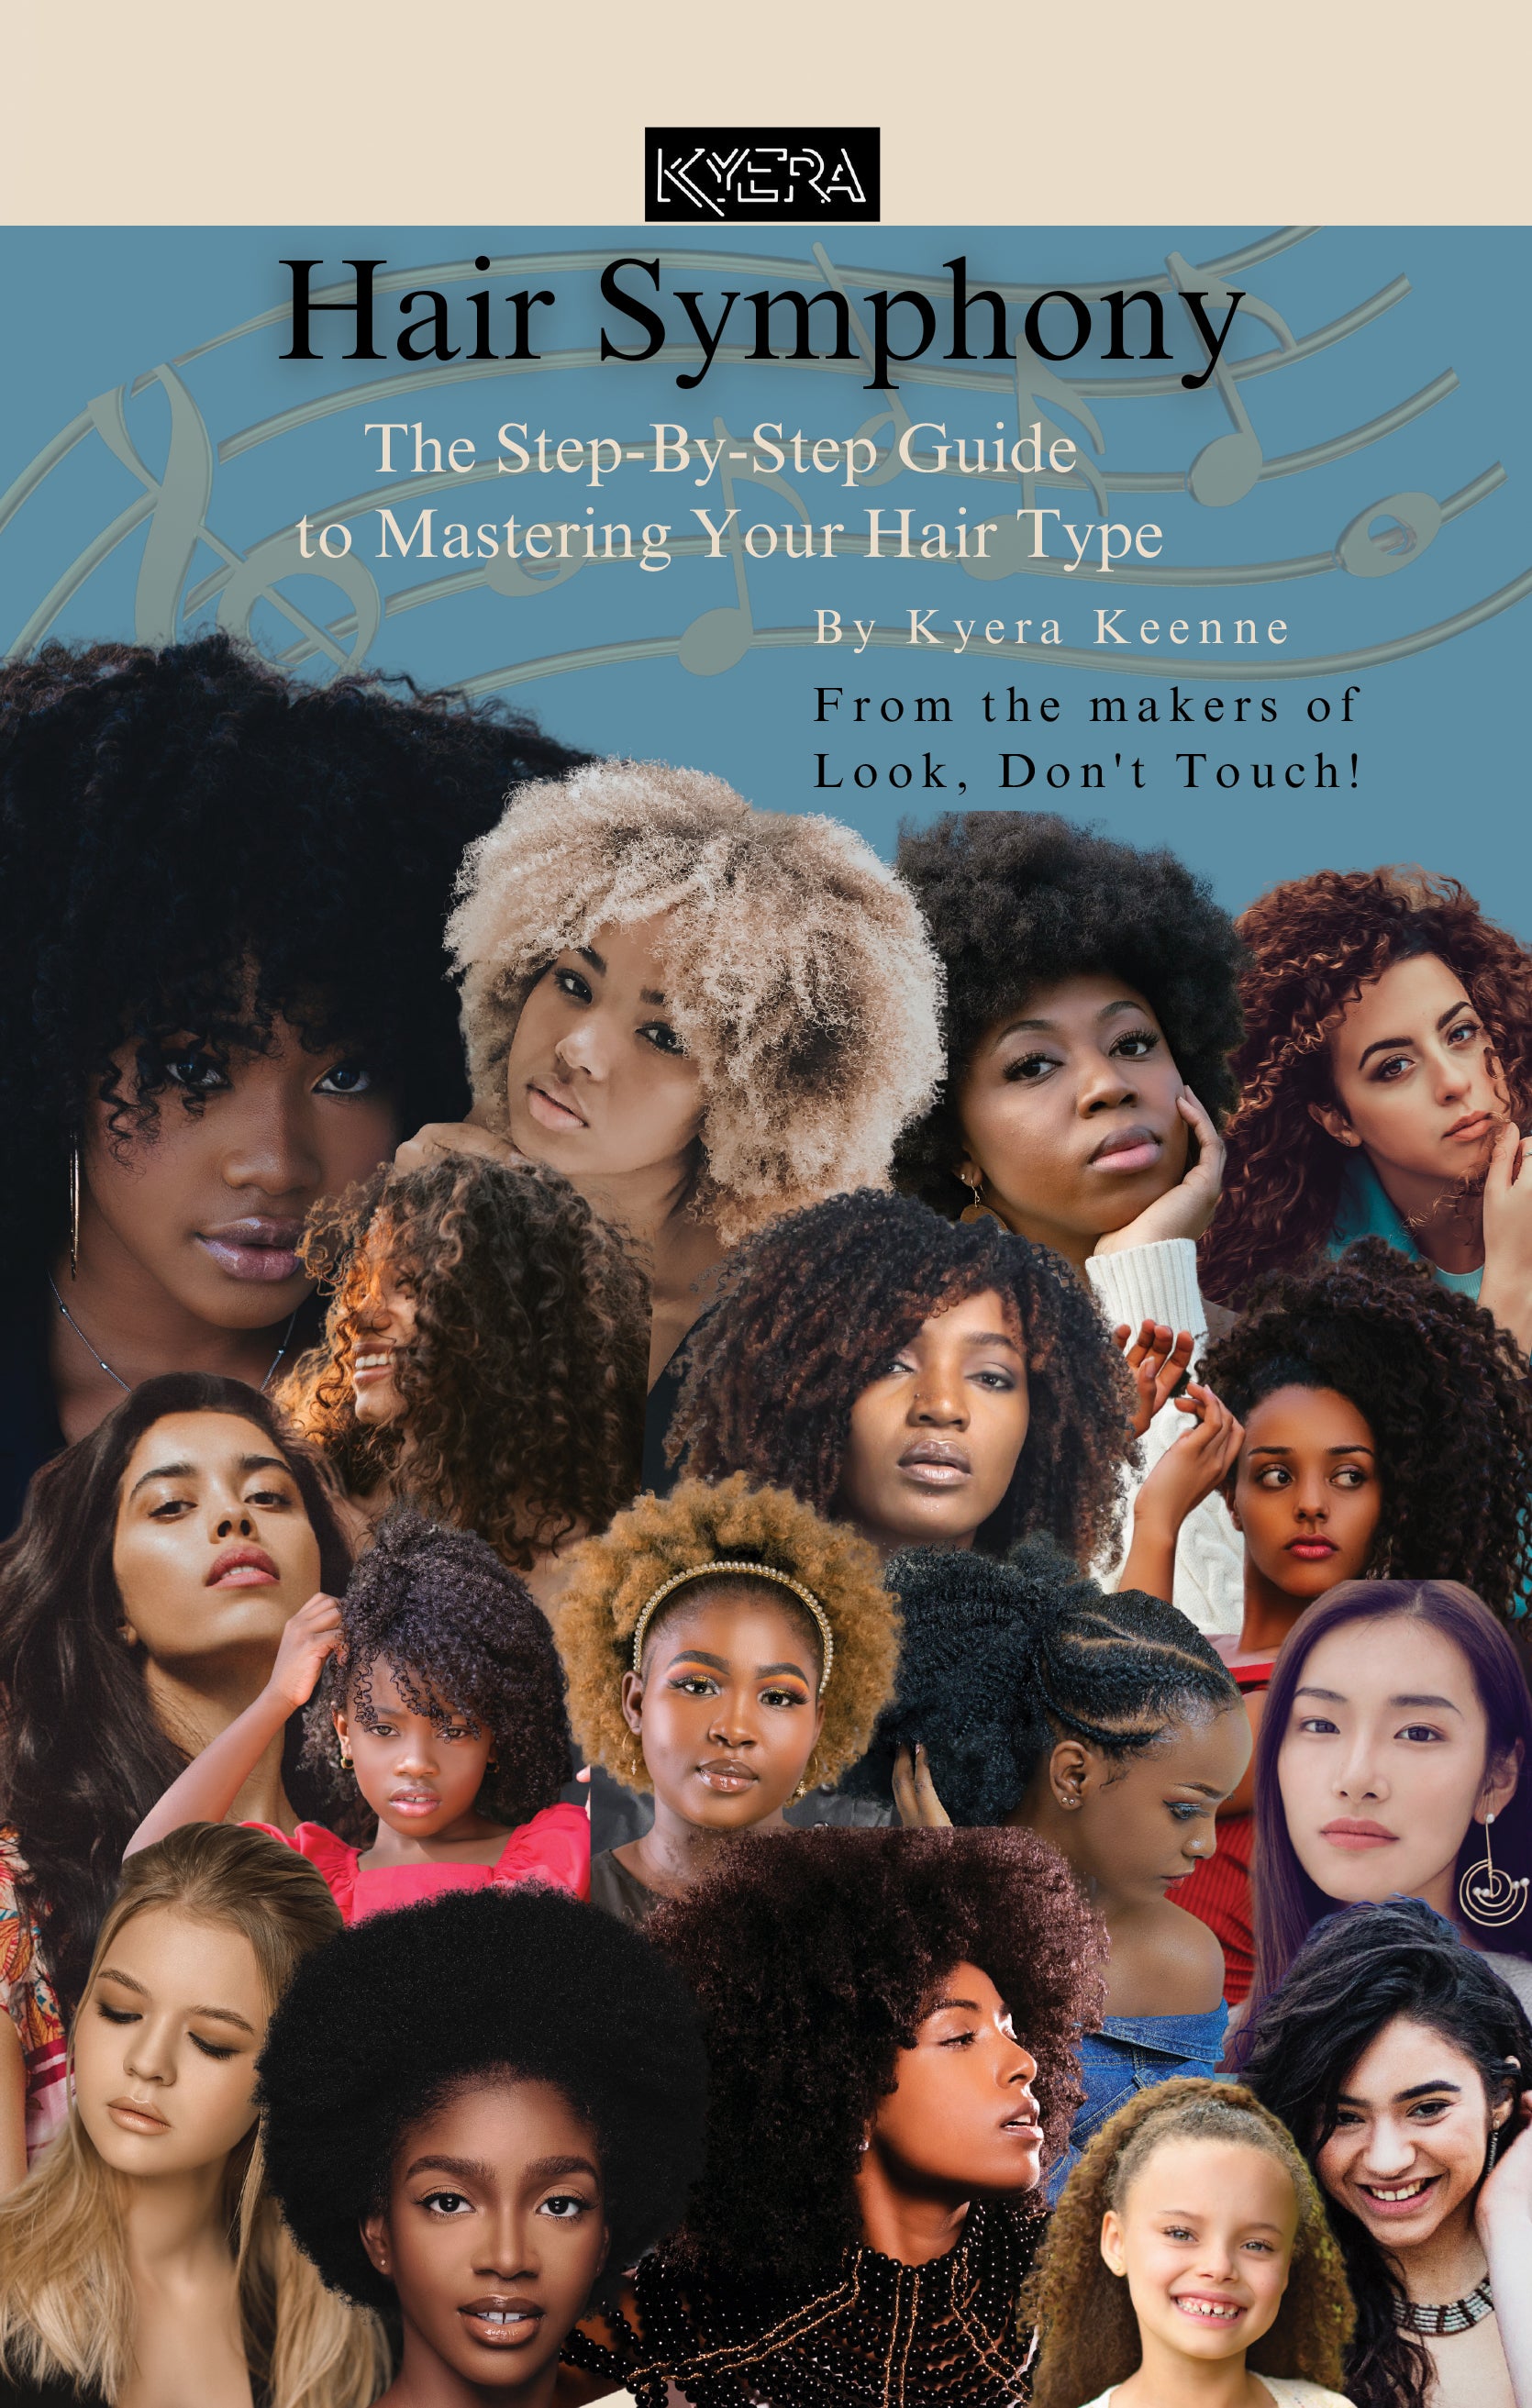 Hair Symphony - The Step-By-Step Guide to Mastering Your Hair Type  (Kindle/Amazon E-Book)